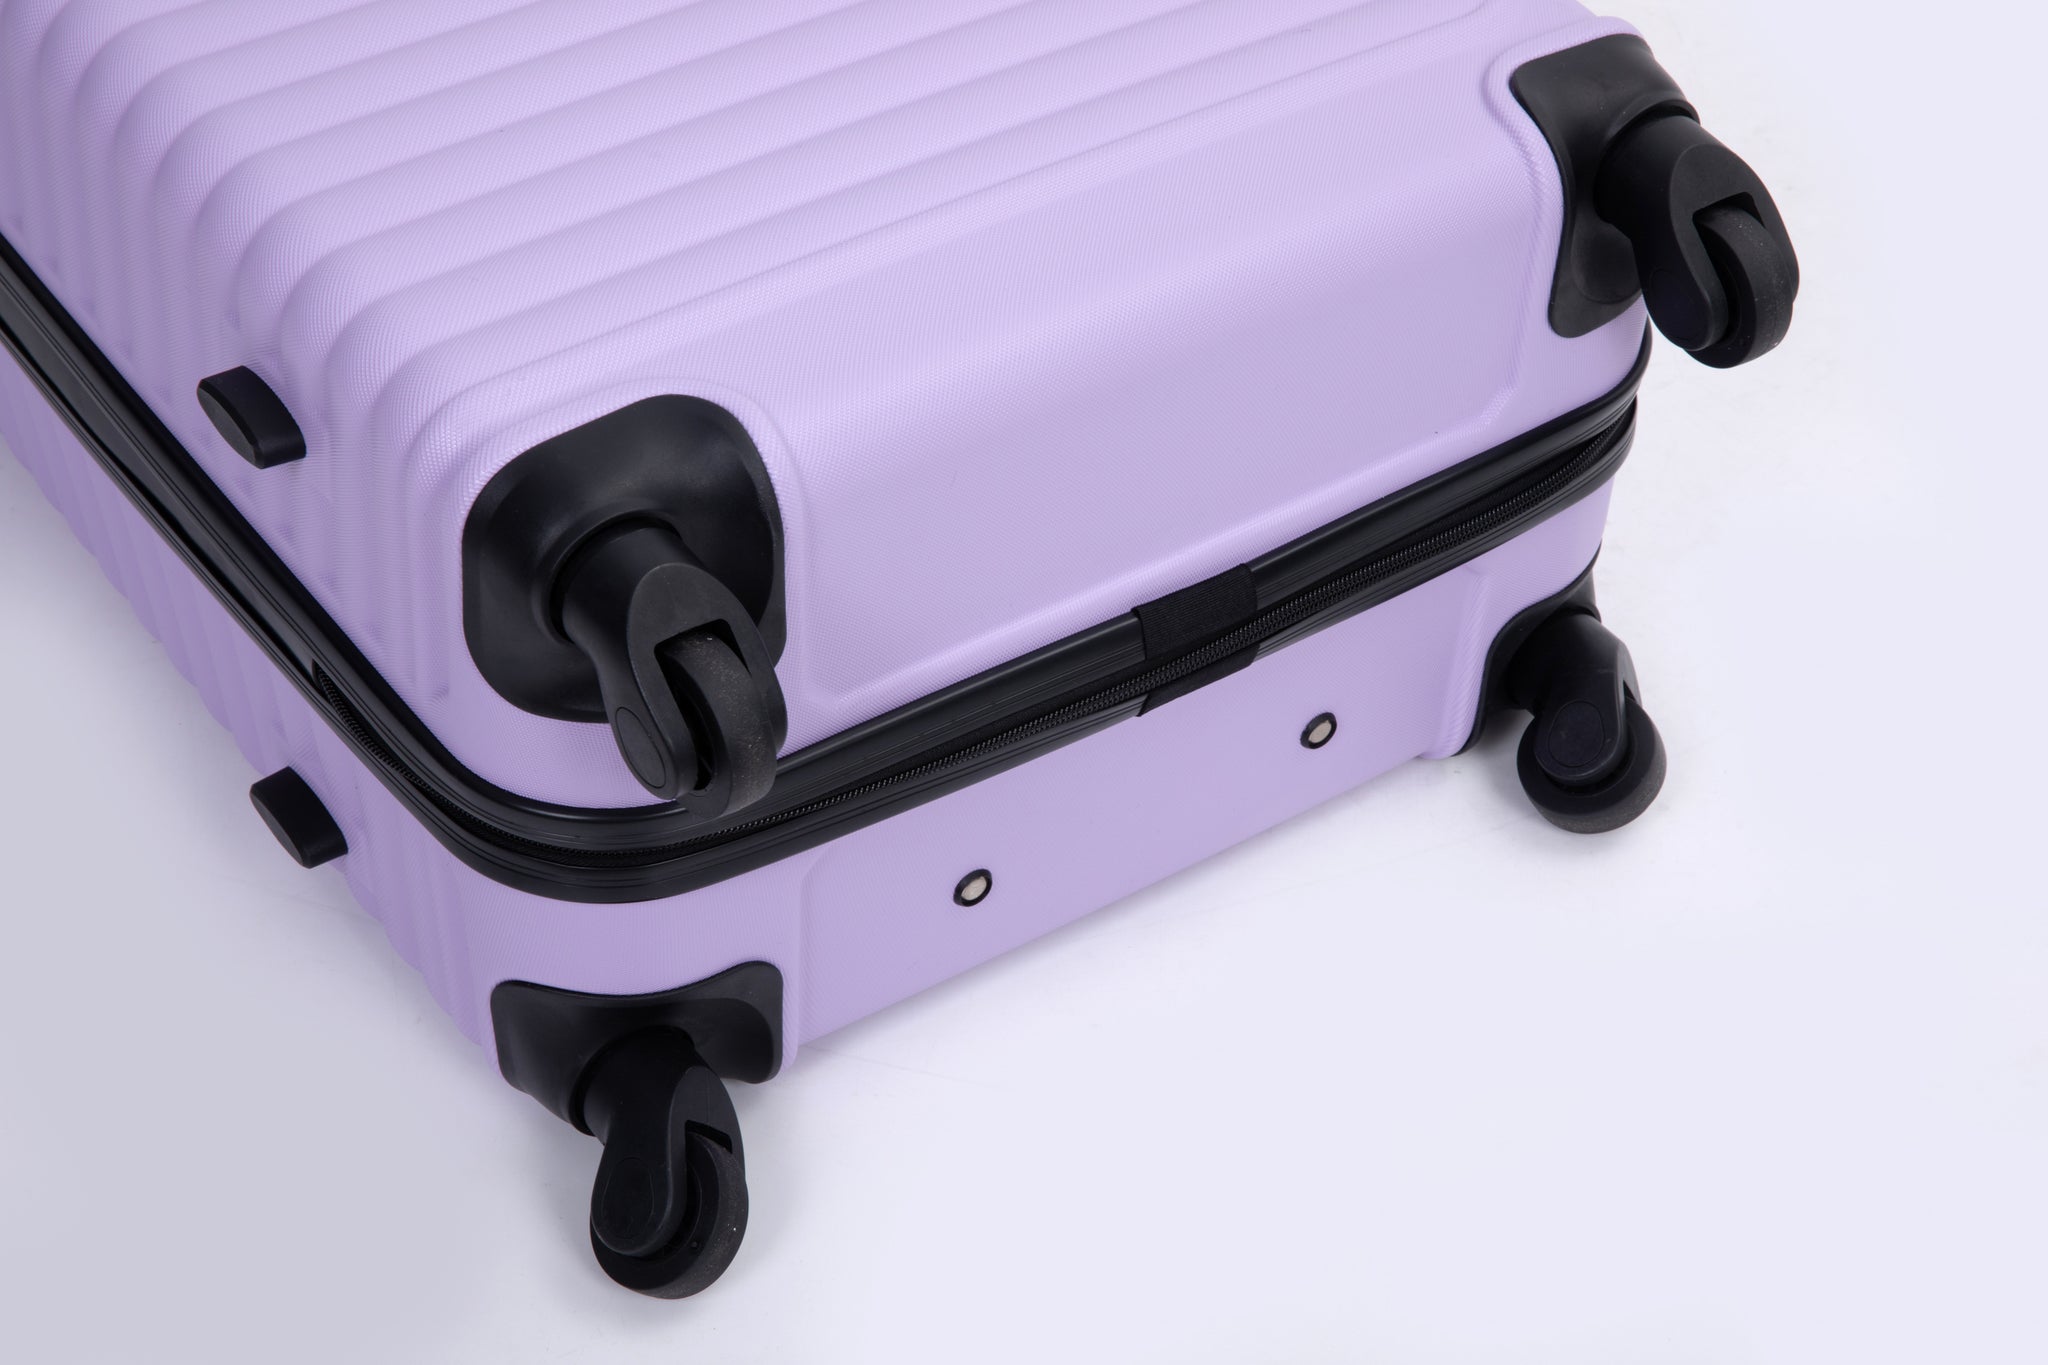 3 Piece Luggage Sets ABS Lightweight Suitcase with Two lavender purple-abs